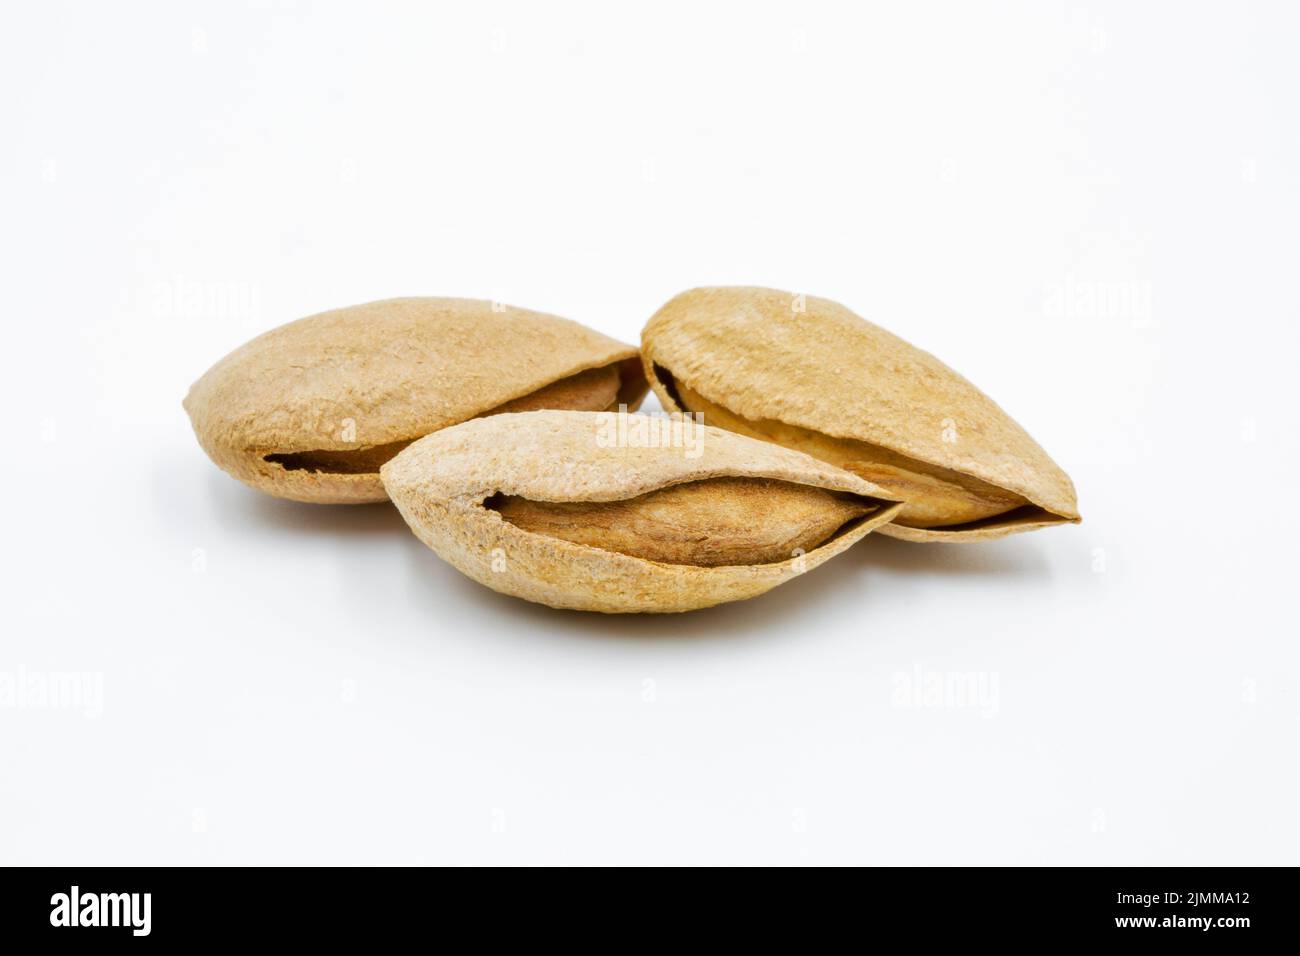 few selected dried inshell almonds closeup against white bacground Stock Photo